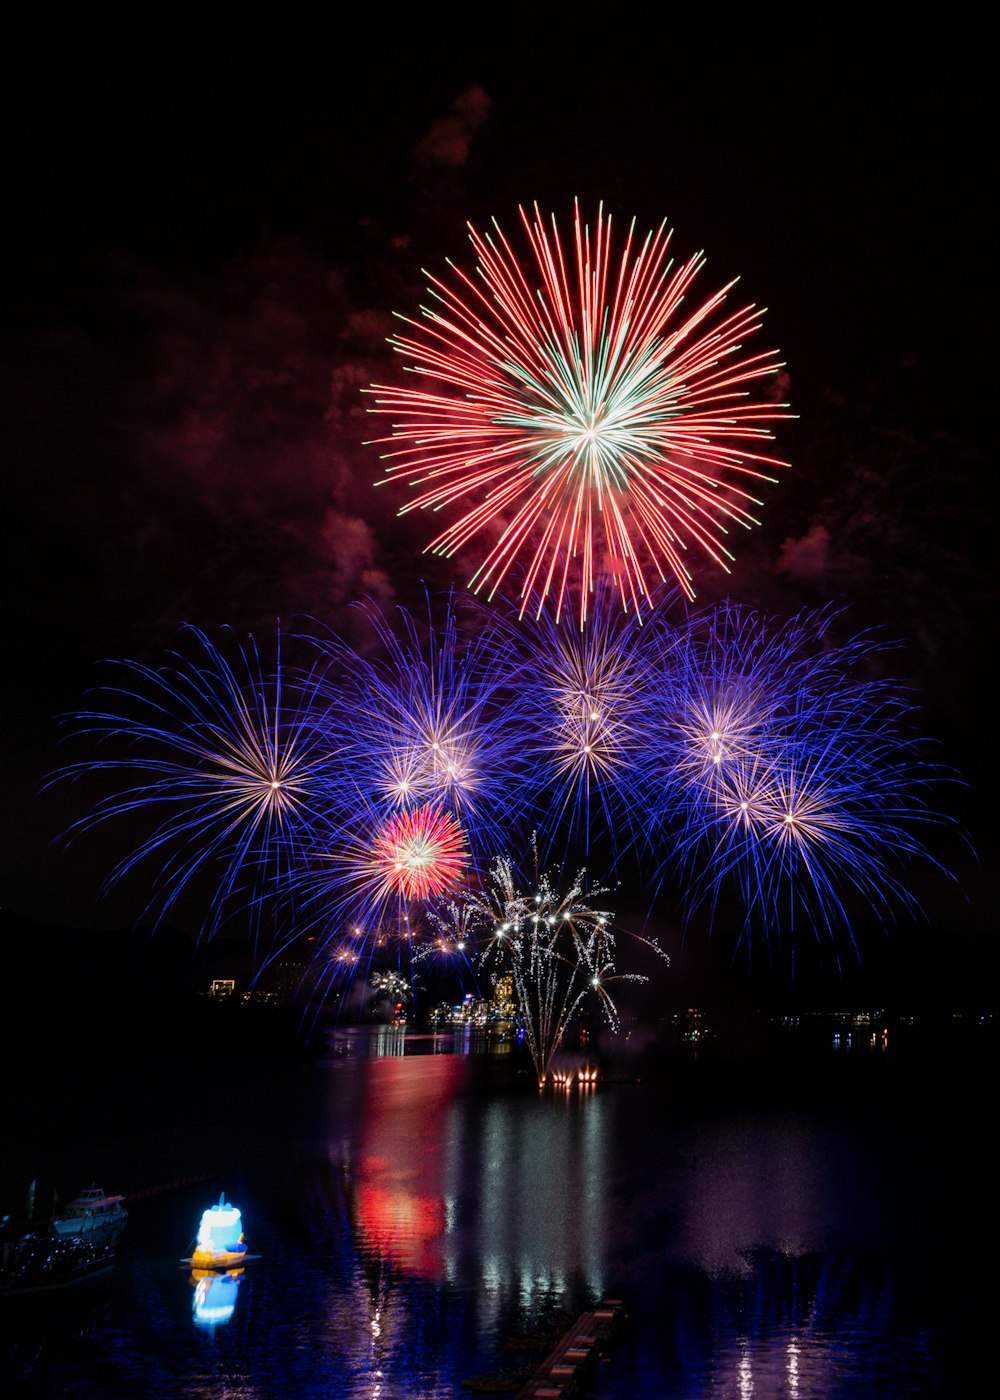 a fireworks display over a body of water